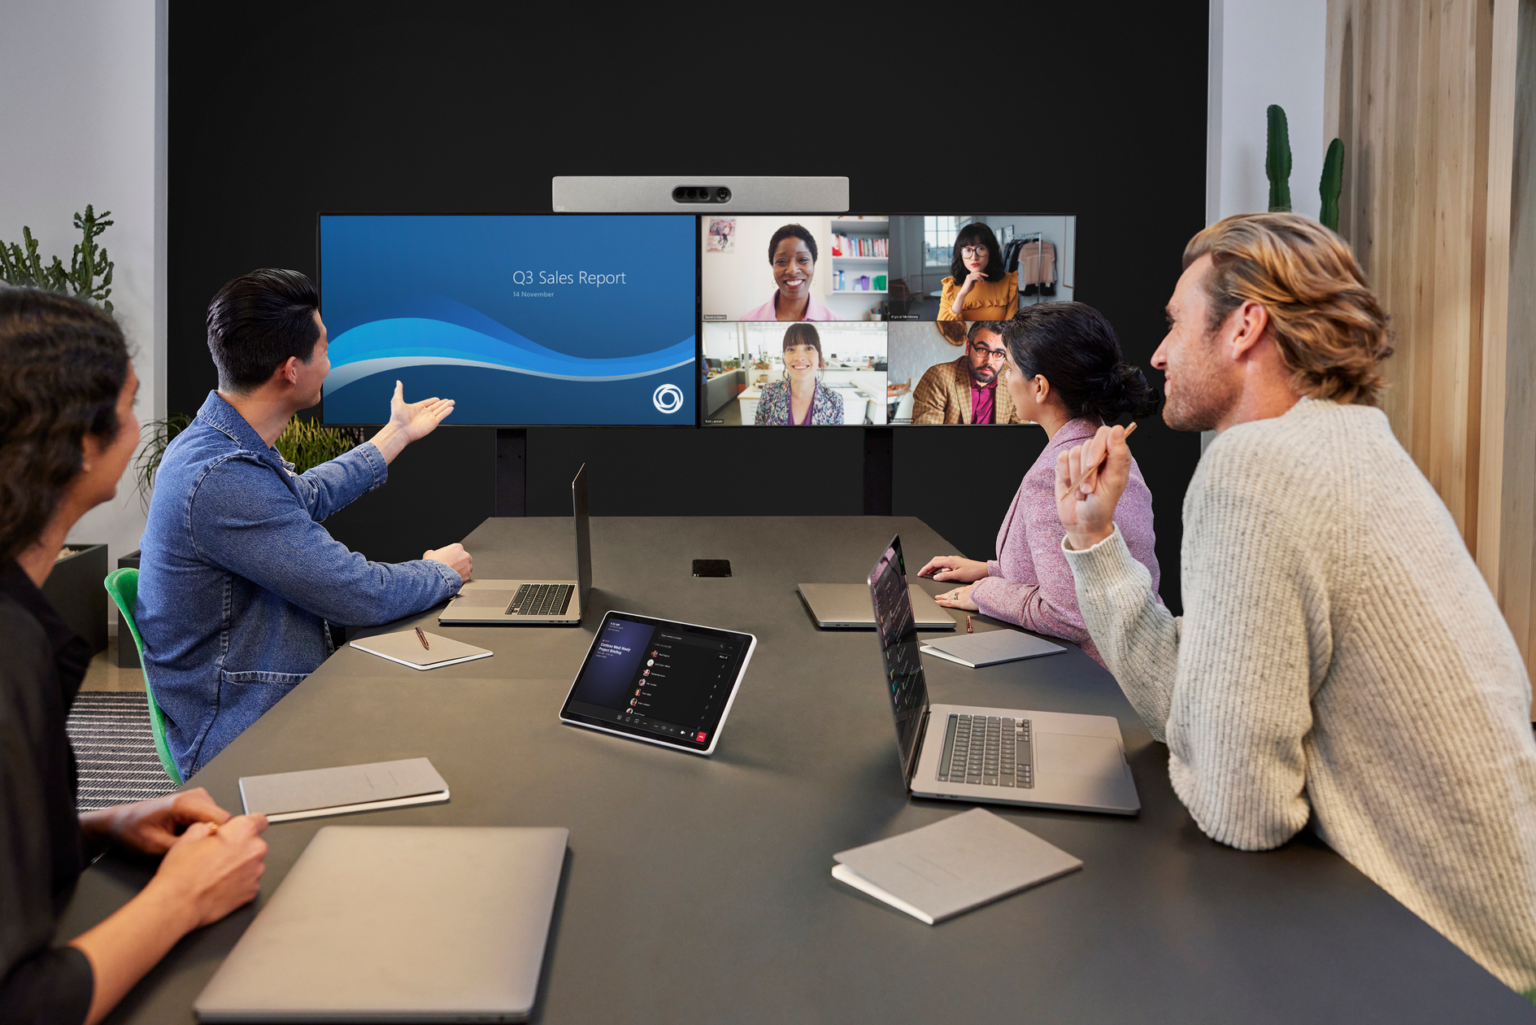 Web Conferencing Vs Webcasting: Which Is Better For You?